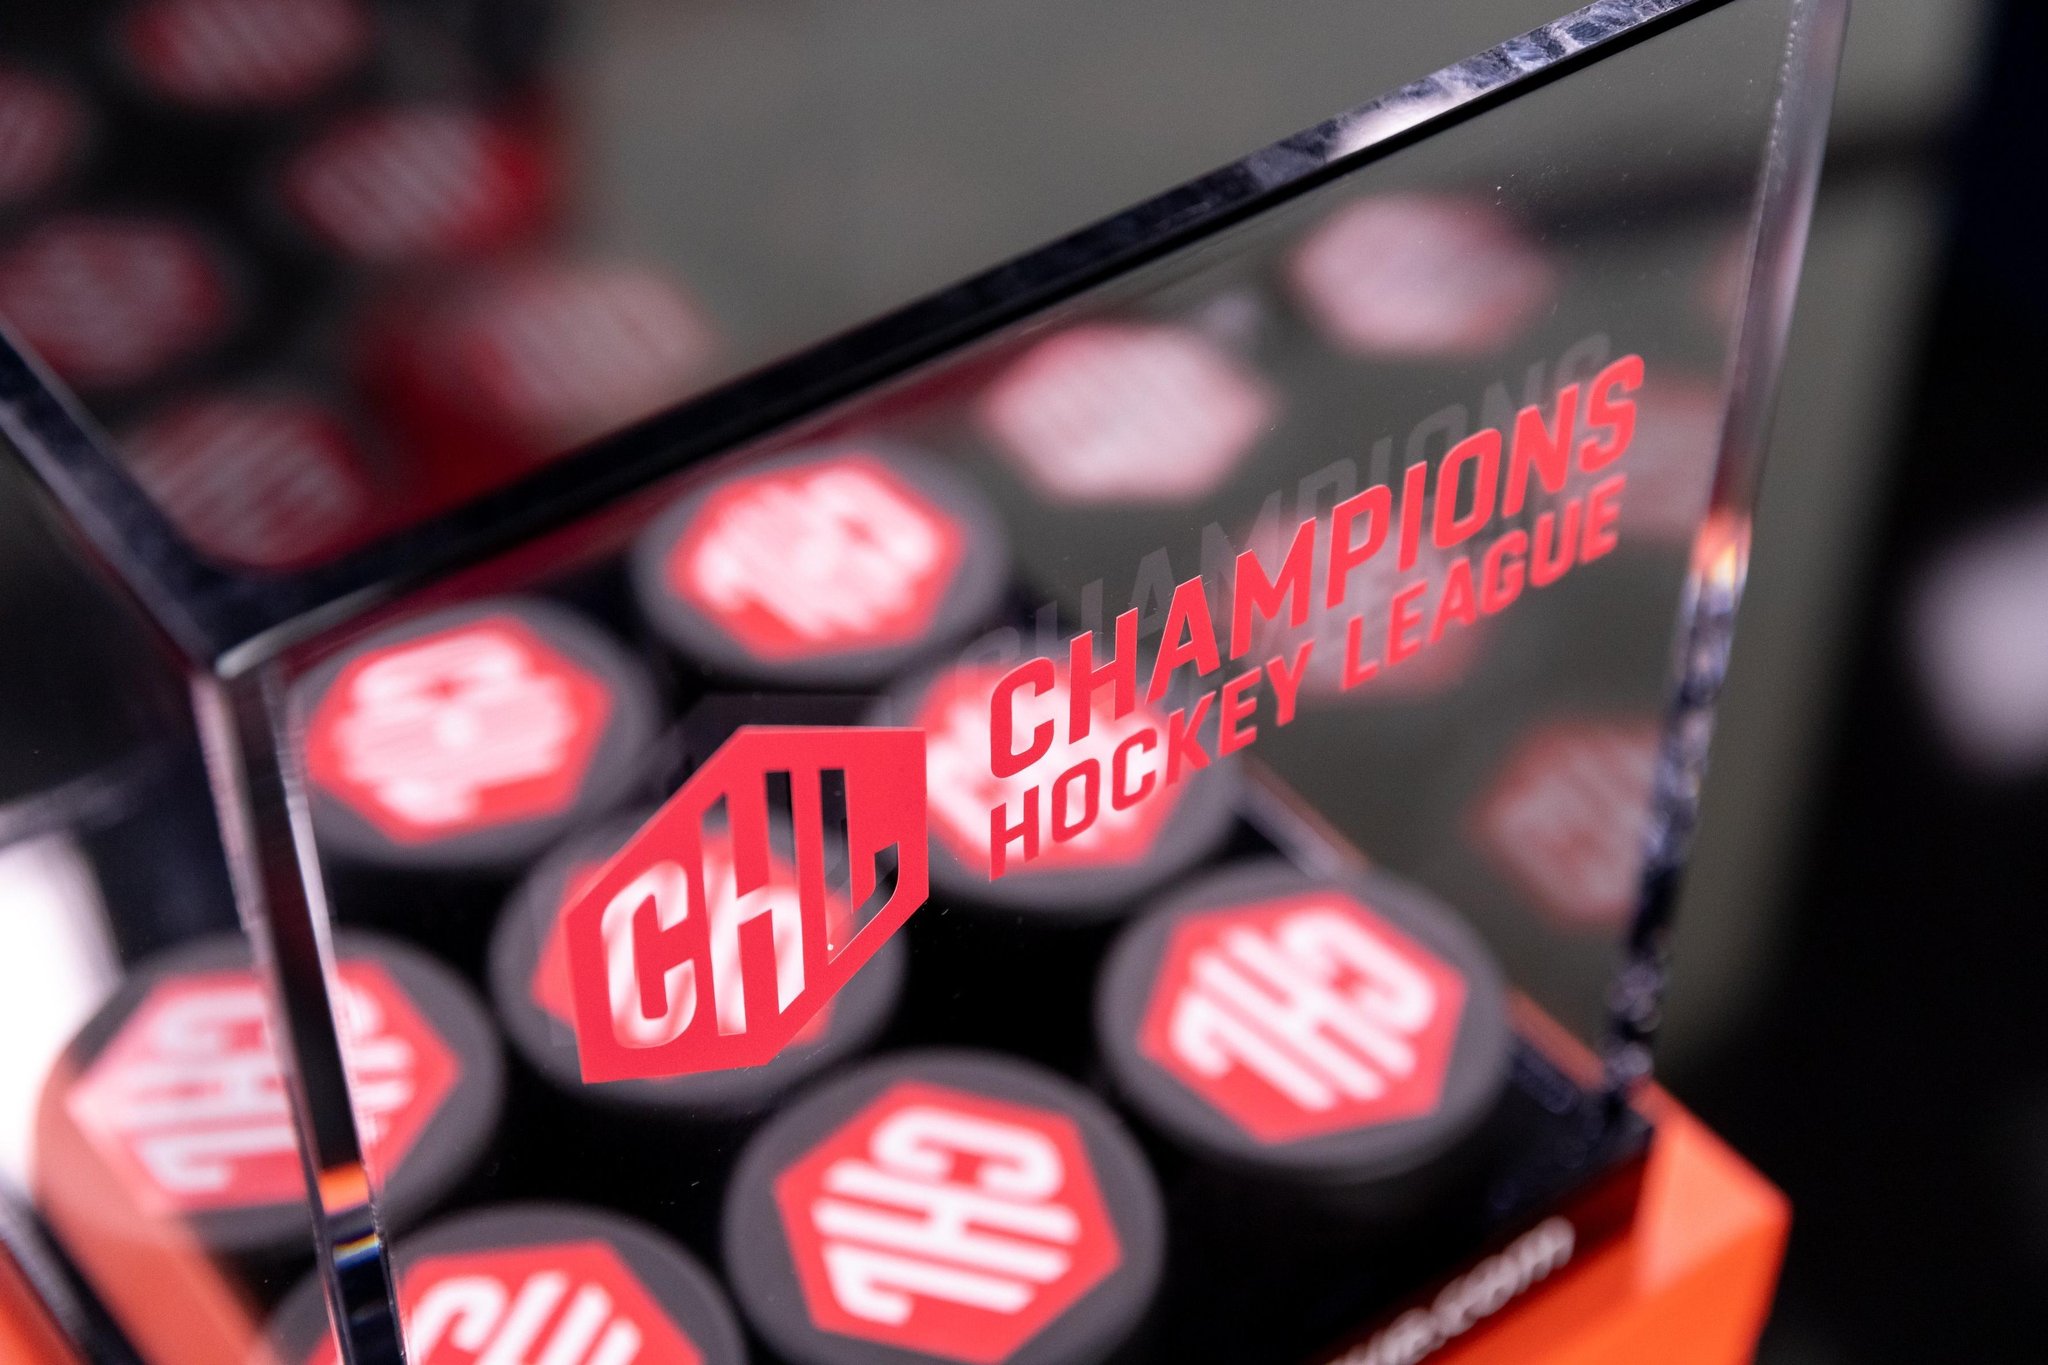 Belfast Giants set for CHL draw on 25 May